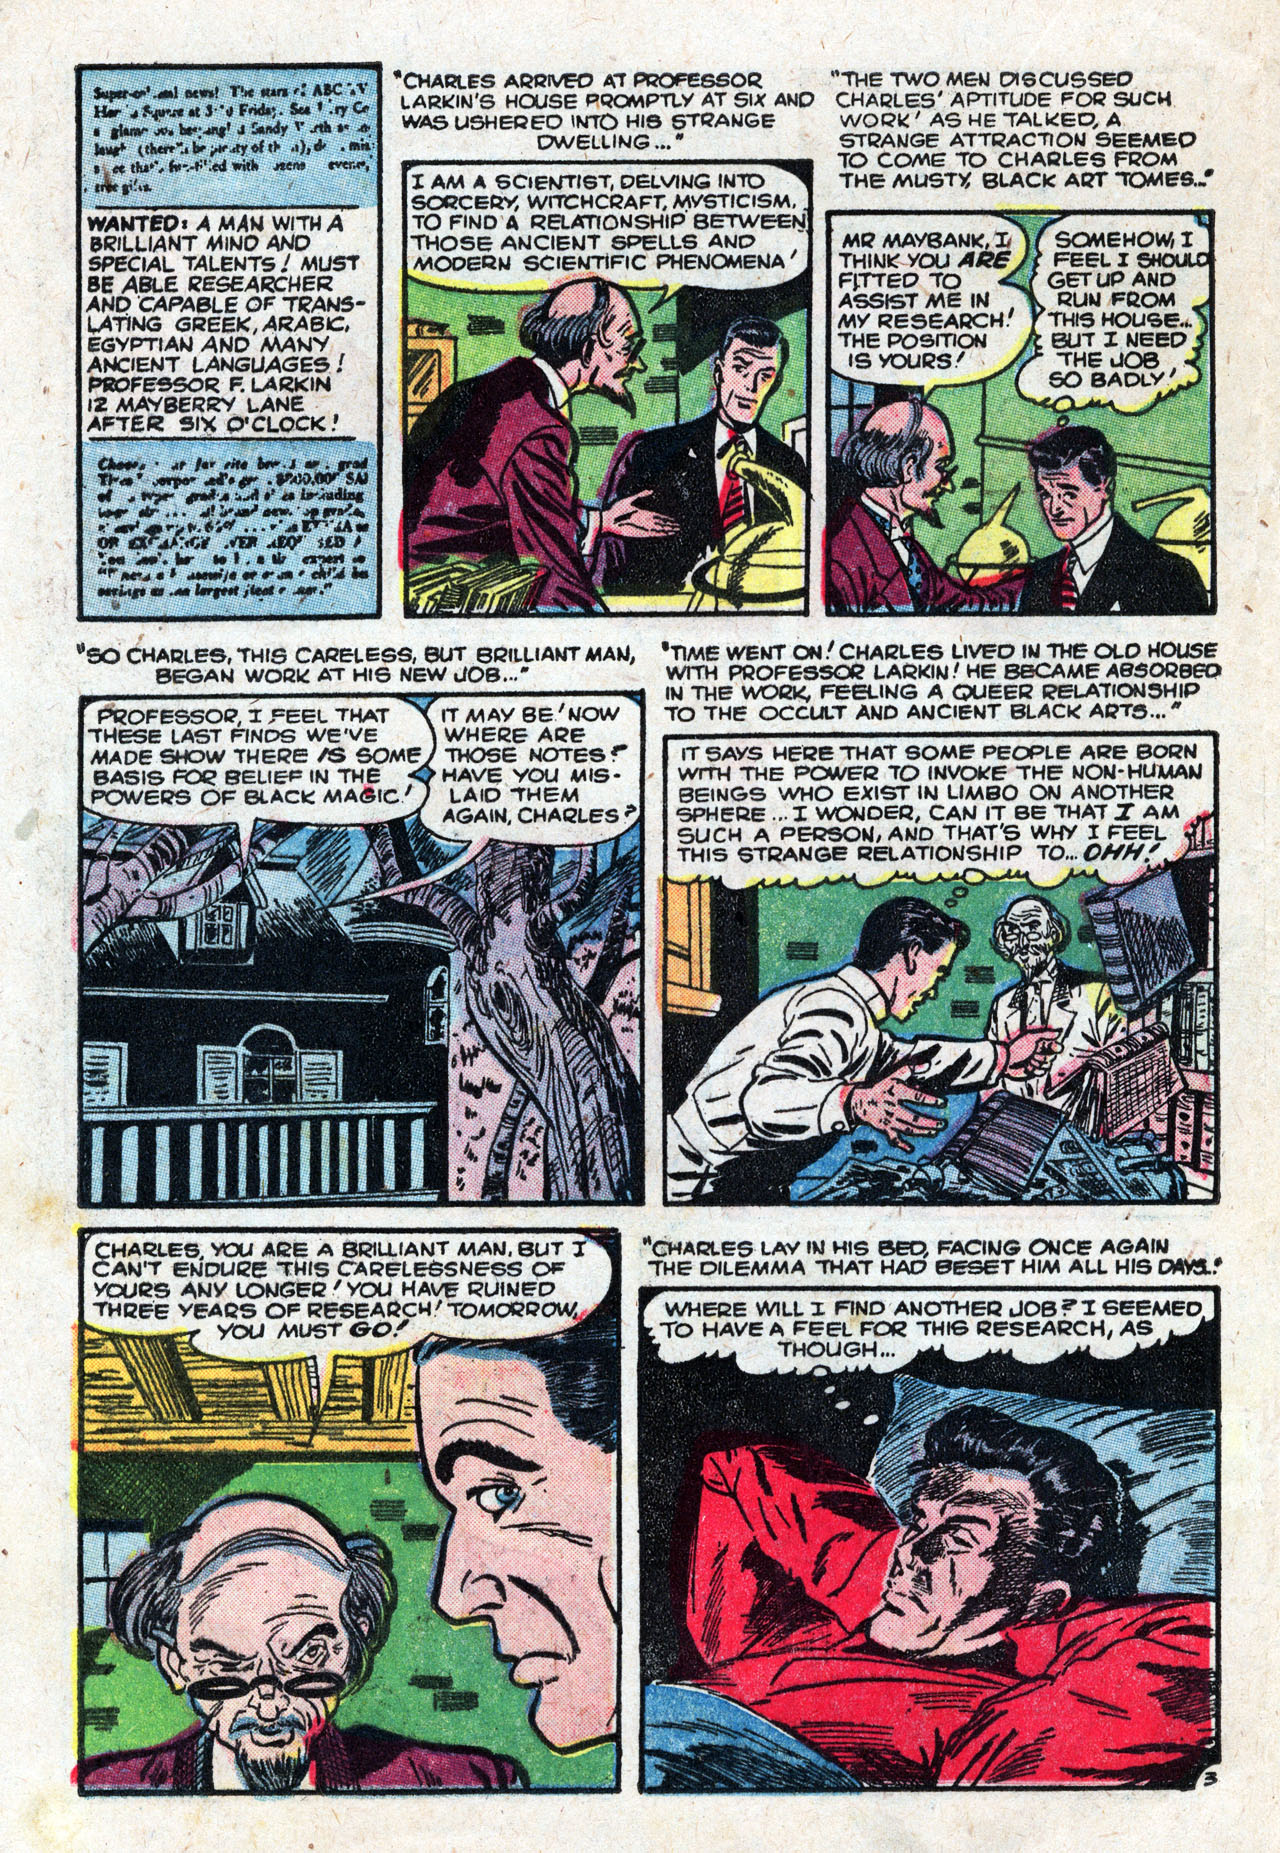 Marvel Tales (1949) 150 Page 19